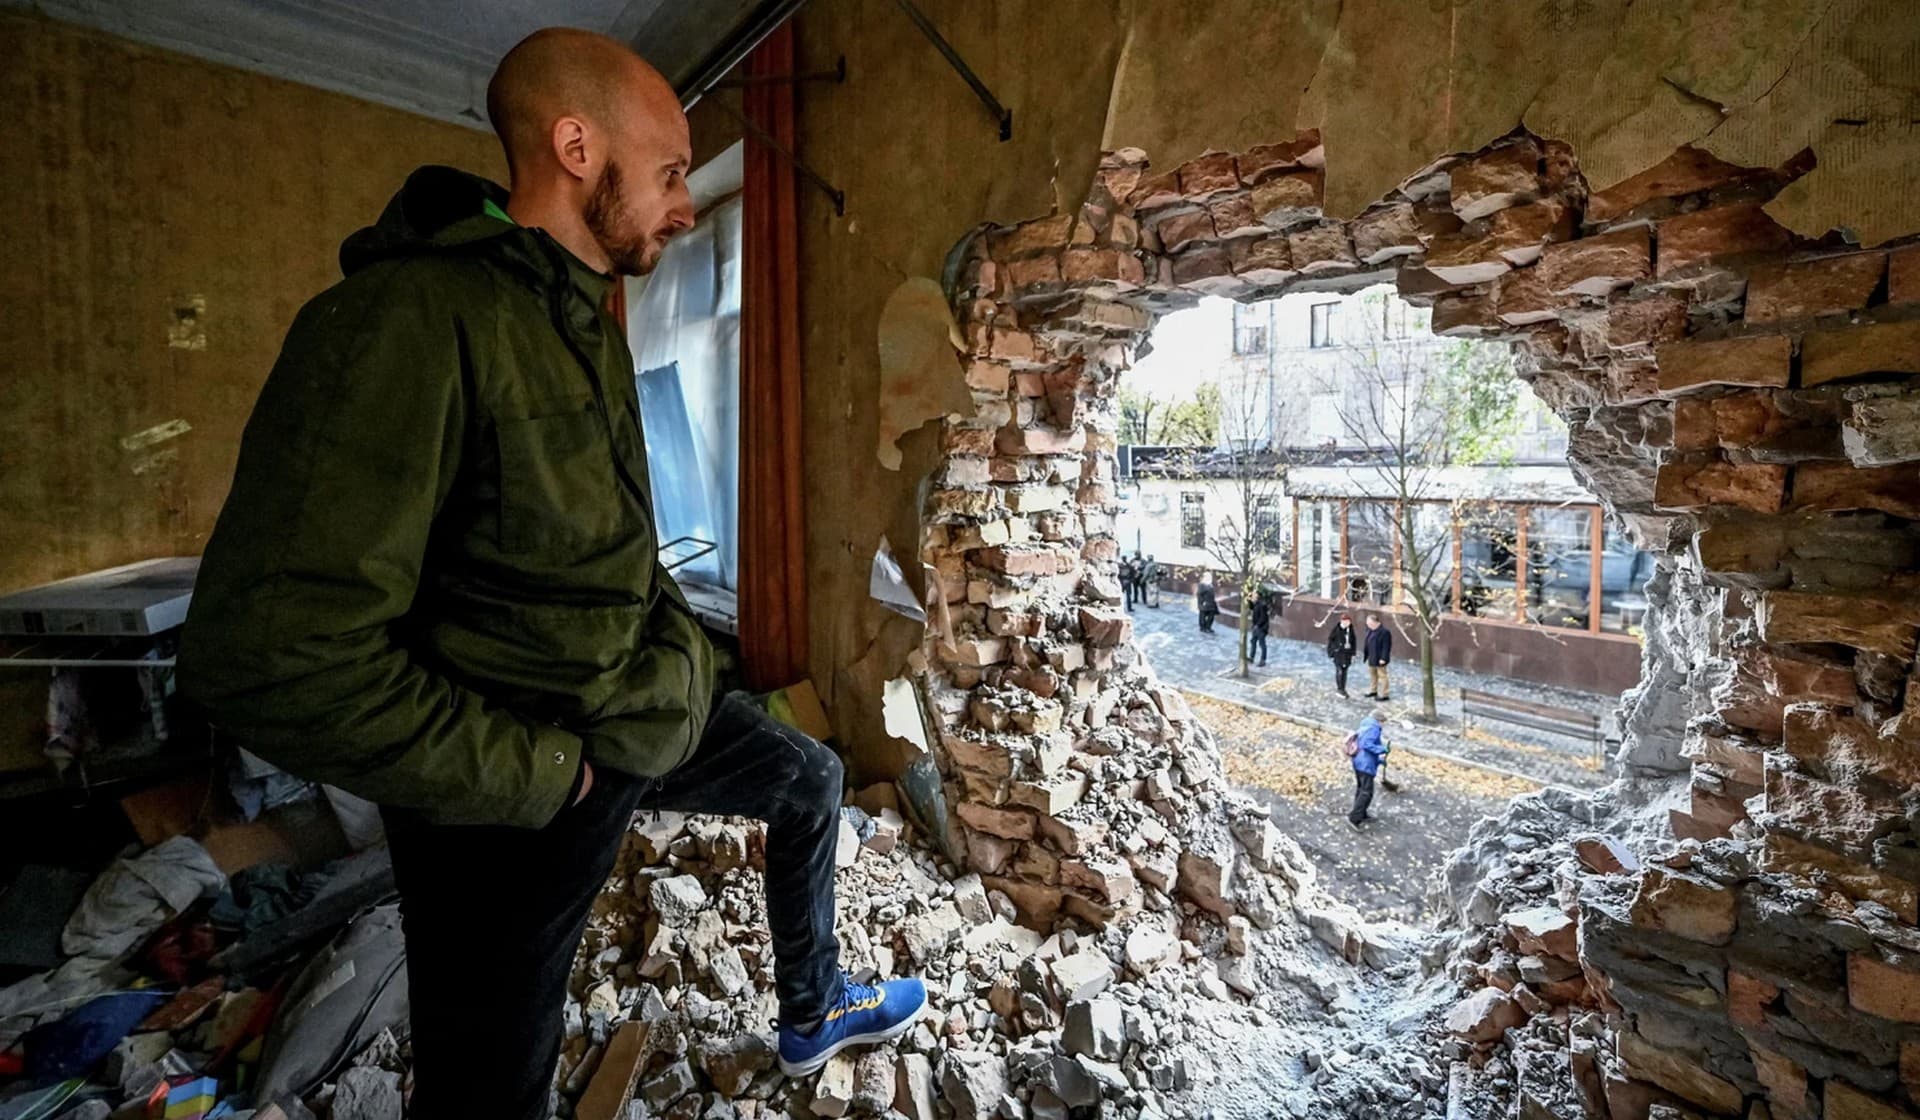 Local resident Dmytro stands in an apartment building destroyed by a Russian missile strike in Zaporizhzhia